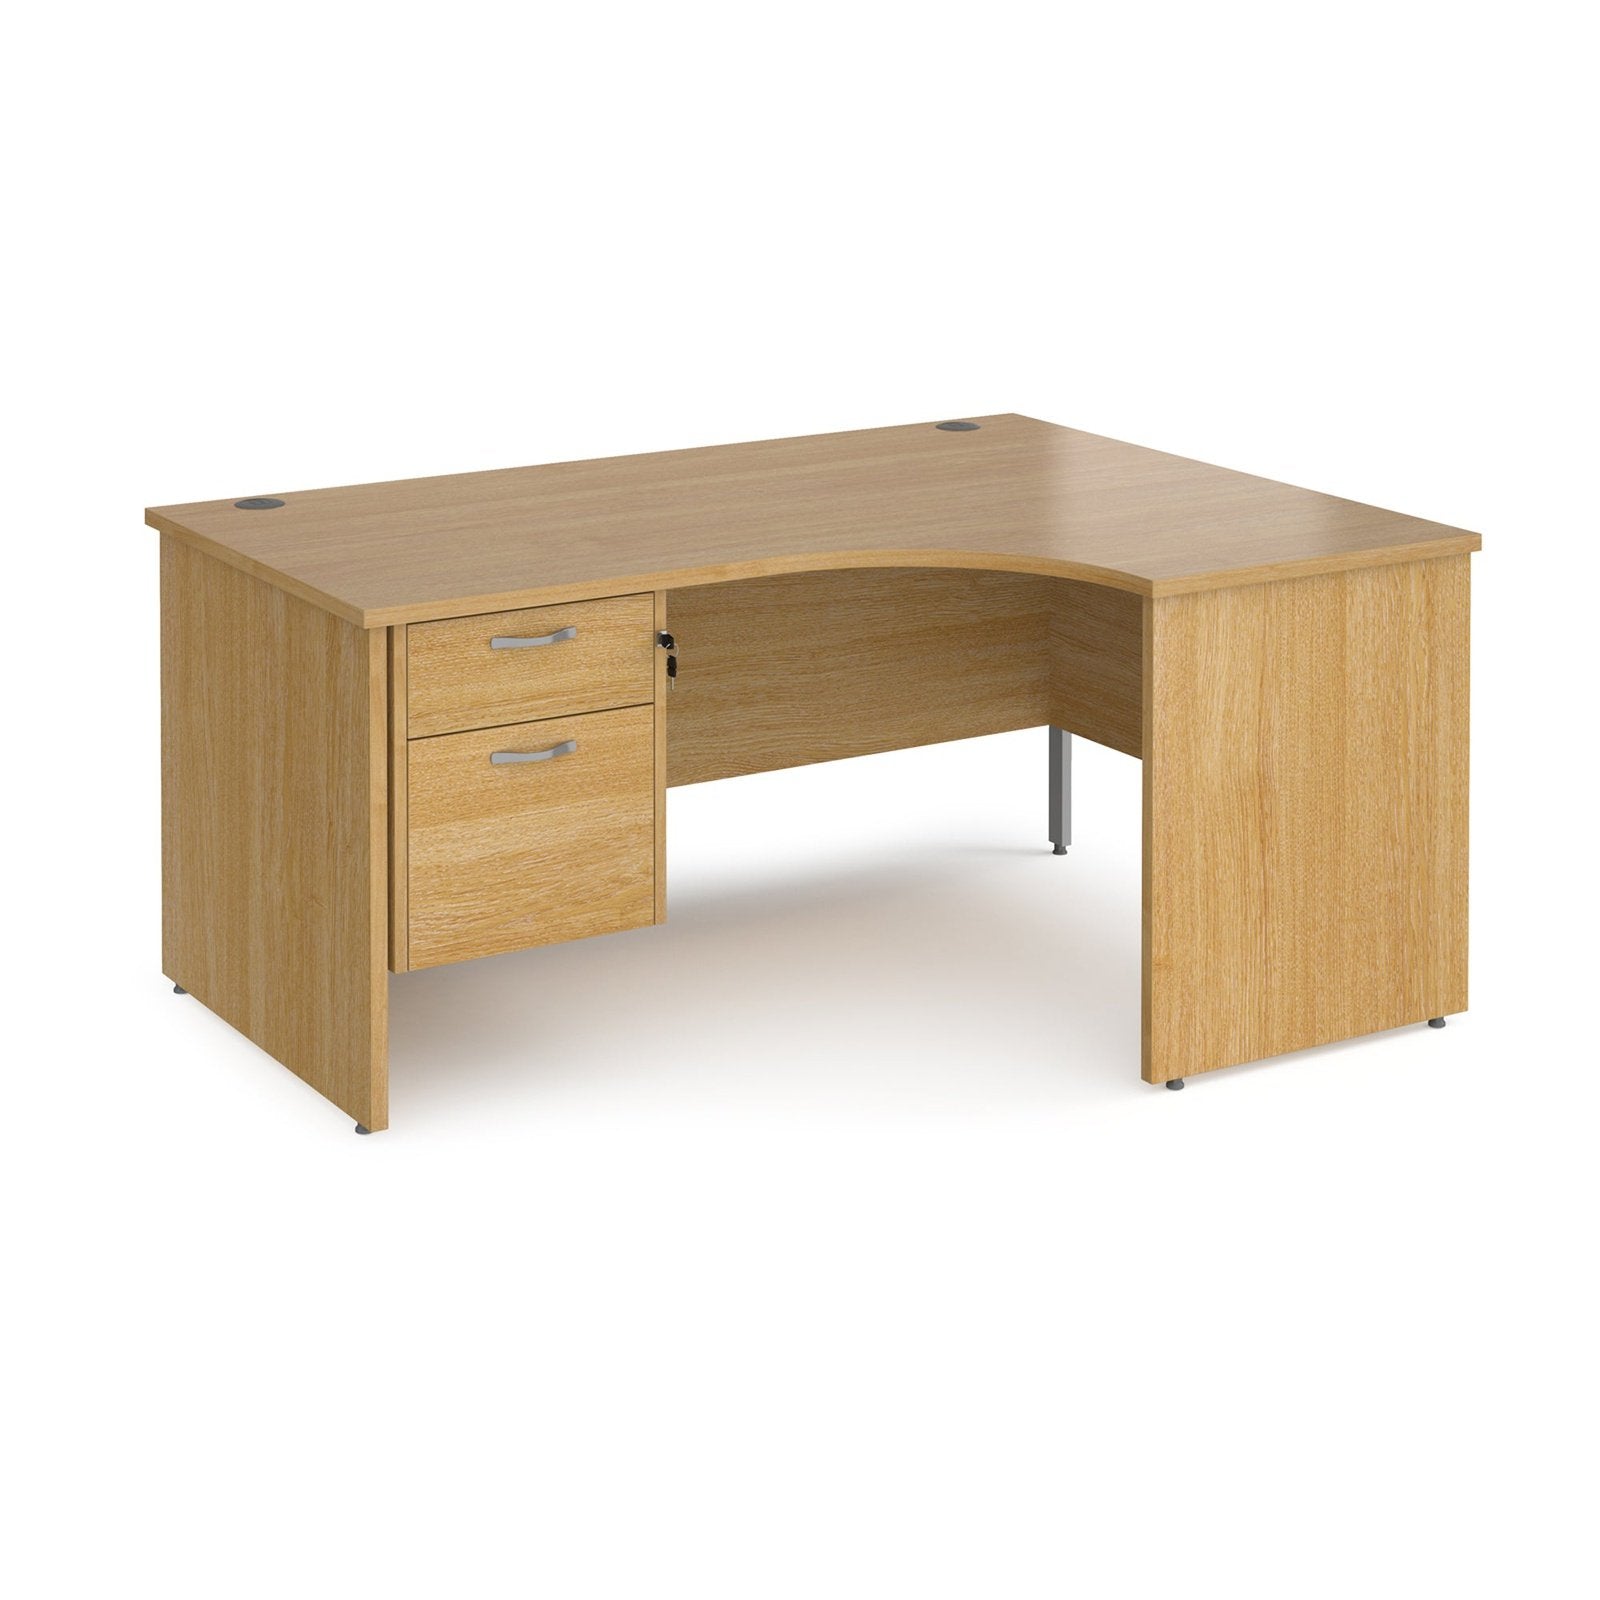 Maestro 25 panel leg right hand ergonomic desk with 2 drawer pedestal - Office Products Online